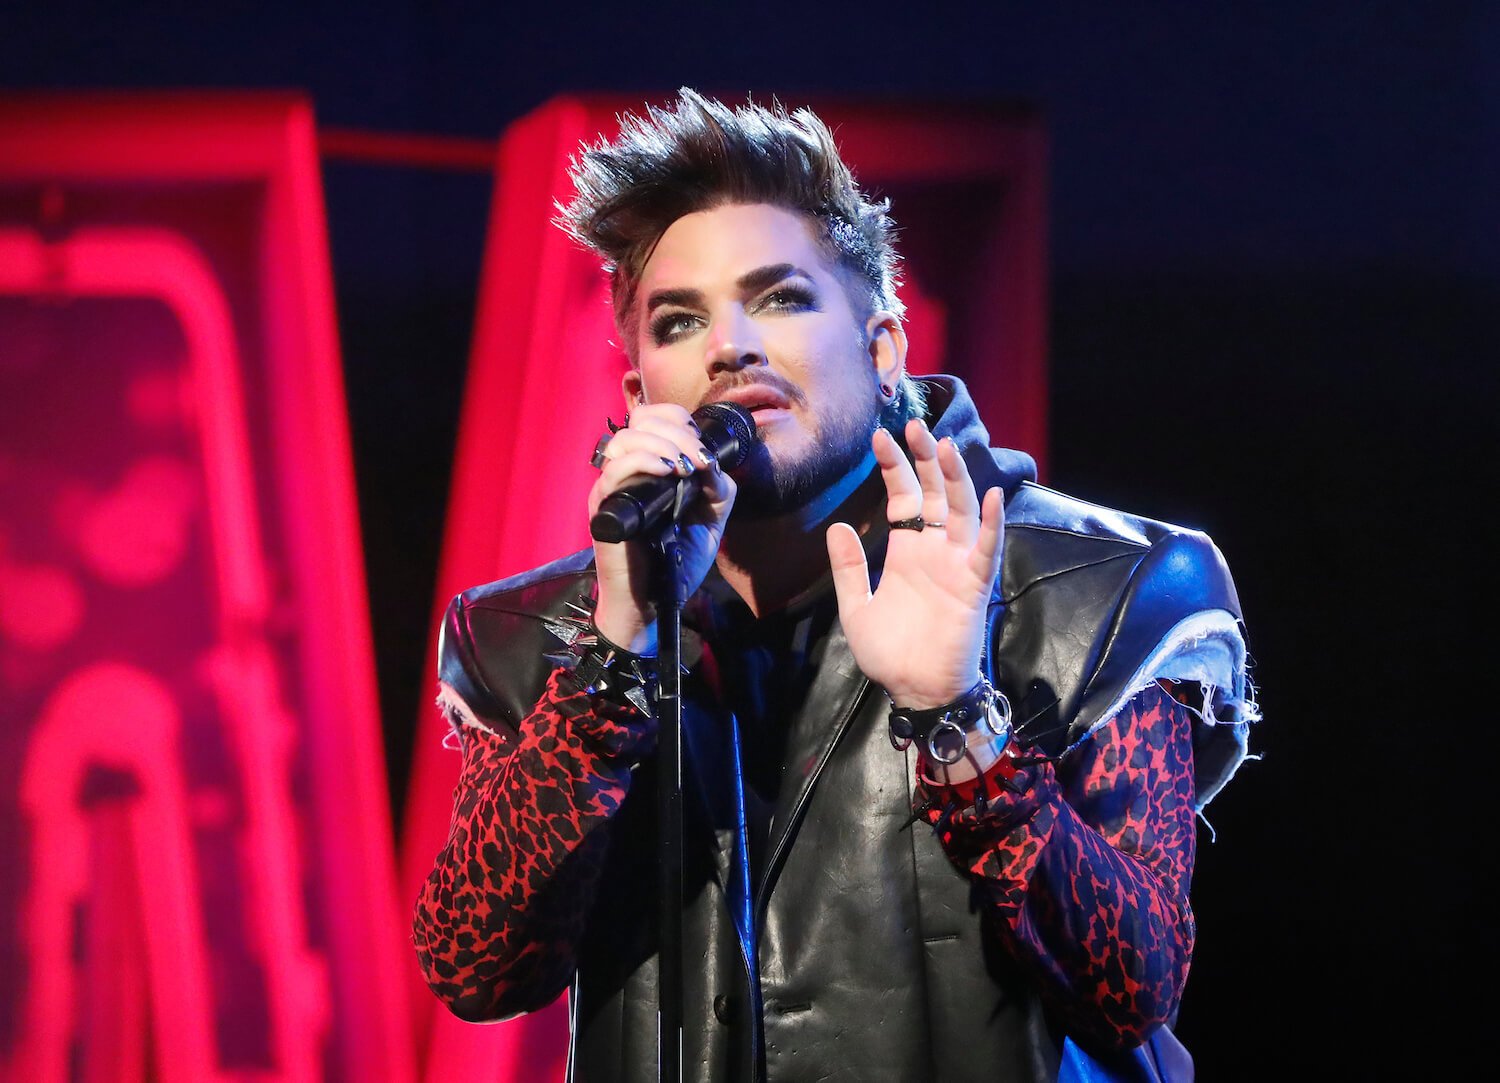 Adam Lambert from 'American Idol' singing into a microphone against a red and black background